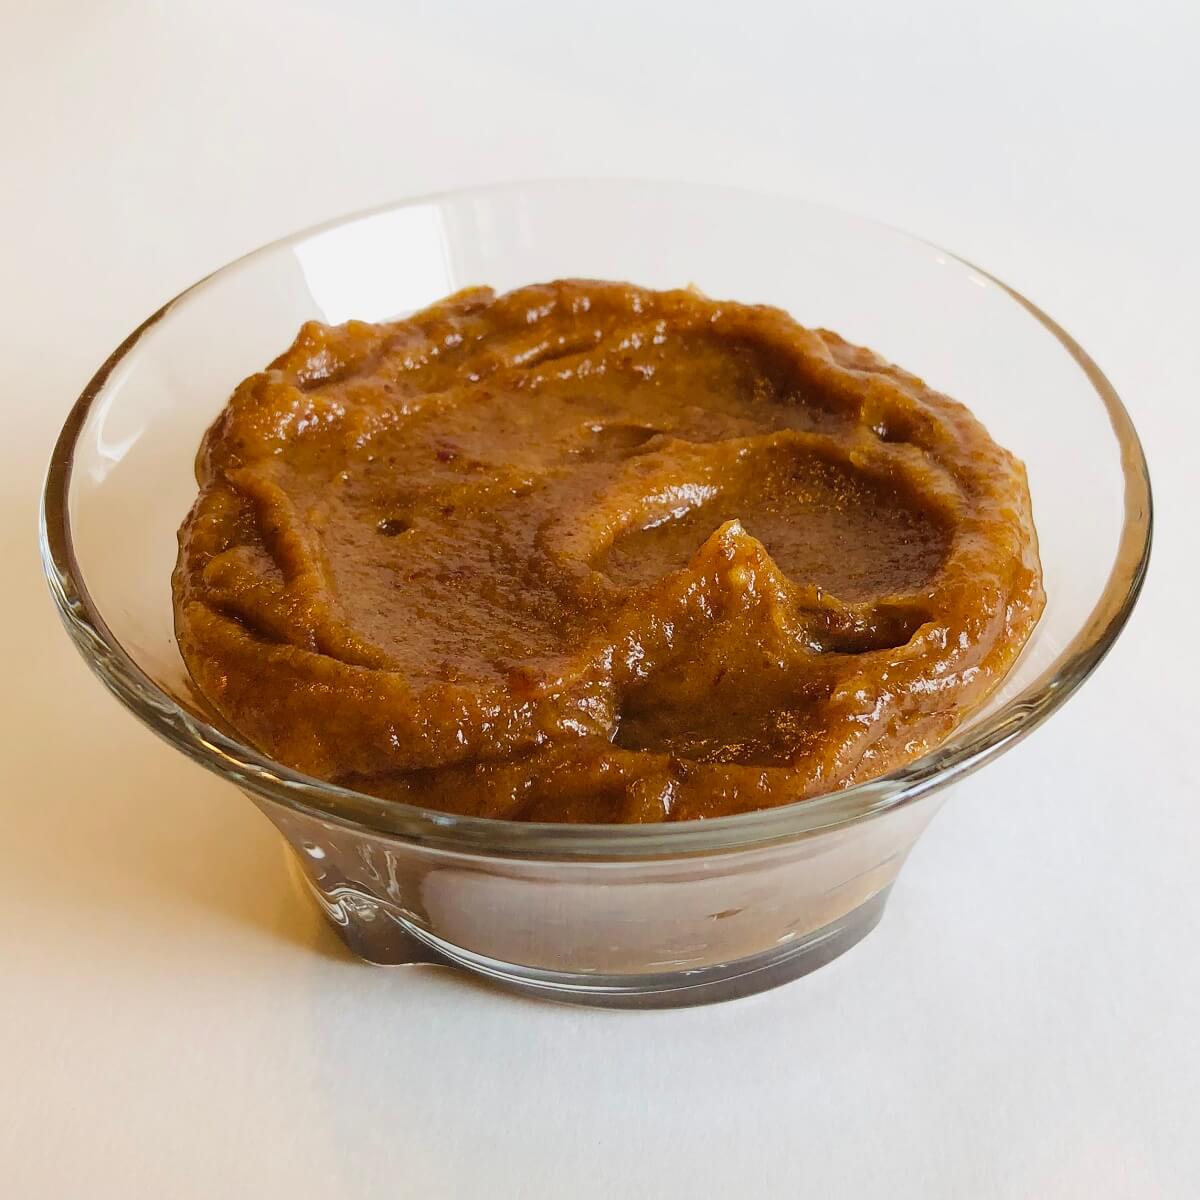 Date paste in a glass dish.